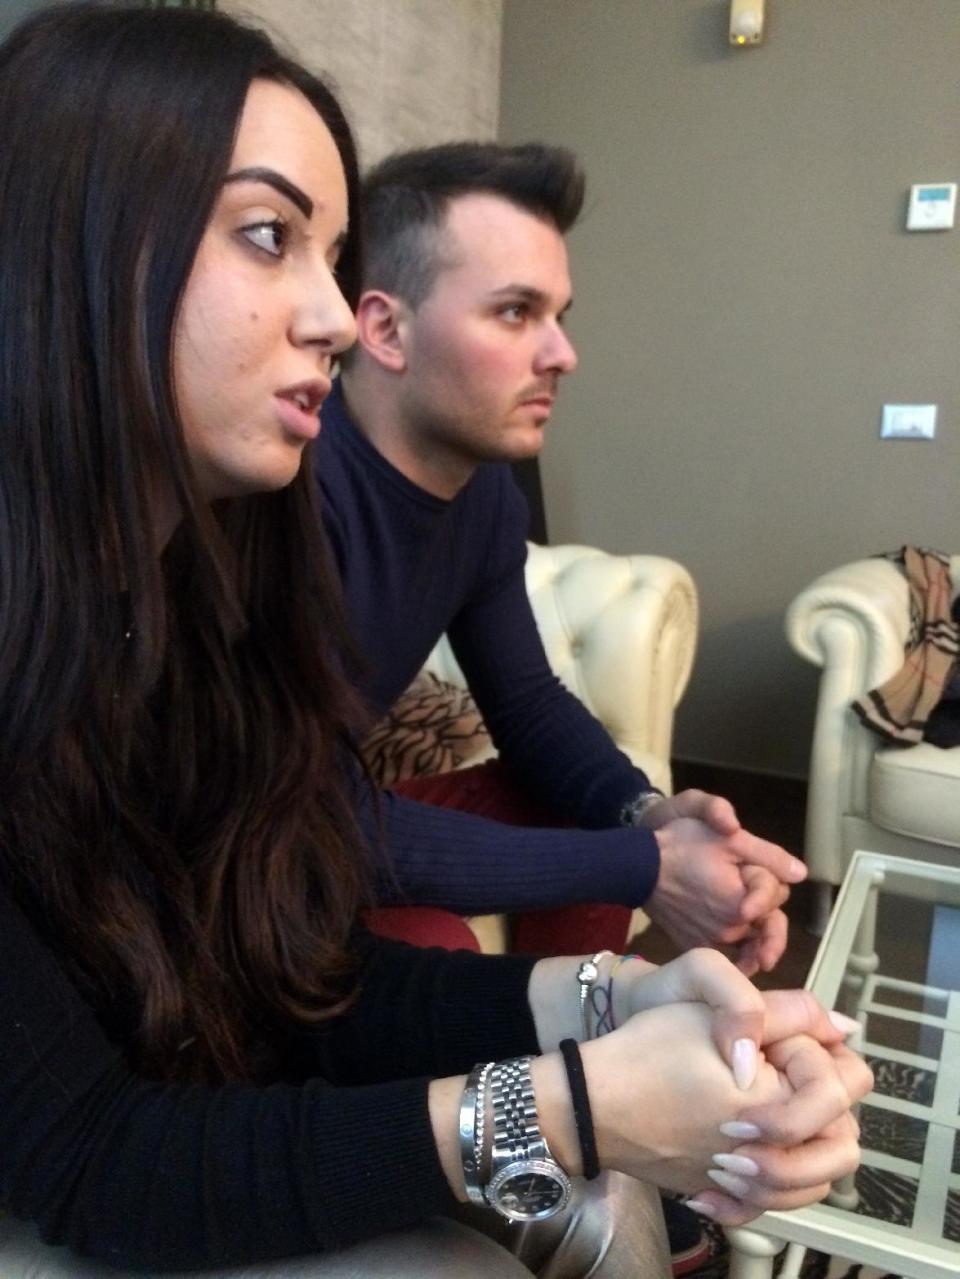 Vincenzo Forti, right, and Giorgia Galassi, left, two of the nine survivors of the avalanche that hit the Hotel Rigopiano last Wednesday, talk to the Associated Press in Giulianova, Italy, Wednesday, Jan. 25, 2017. In an interview with The Associated Press at her parents' home, Giorgia Galassi says she never imagined that an avalanche could have been responsible for the devastation around her in the Hotel Rigopiano. (AP Photo/Nick Dumitrache)